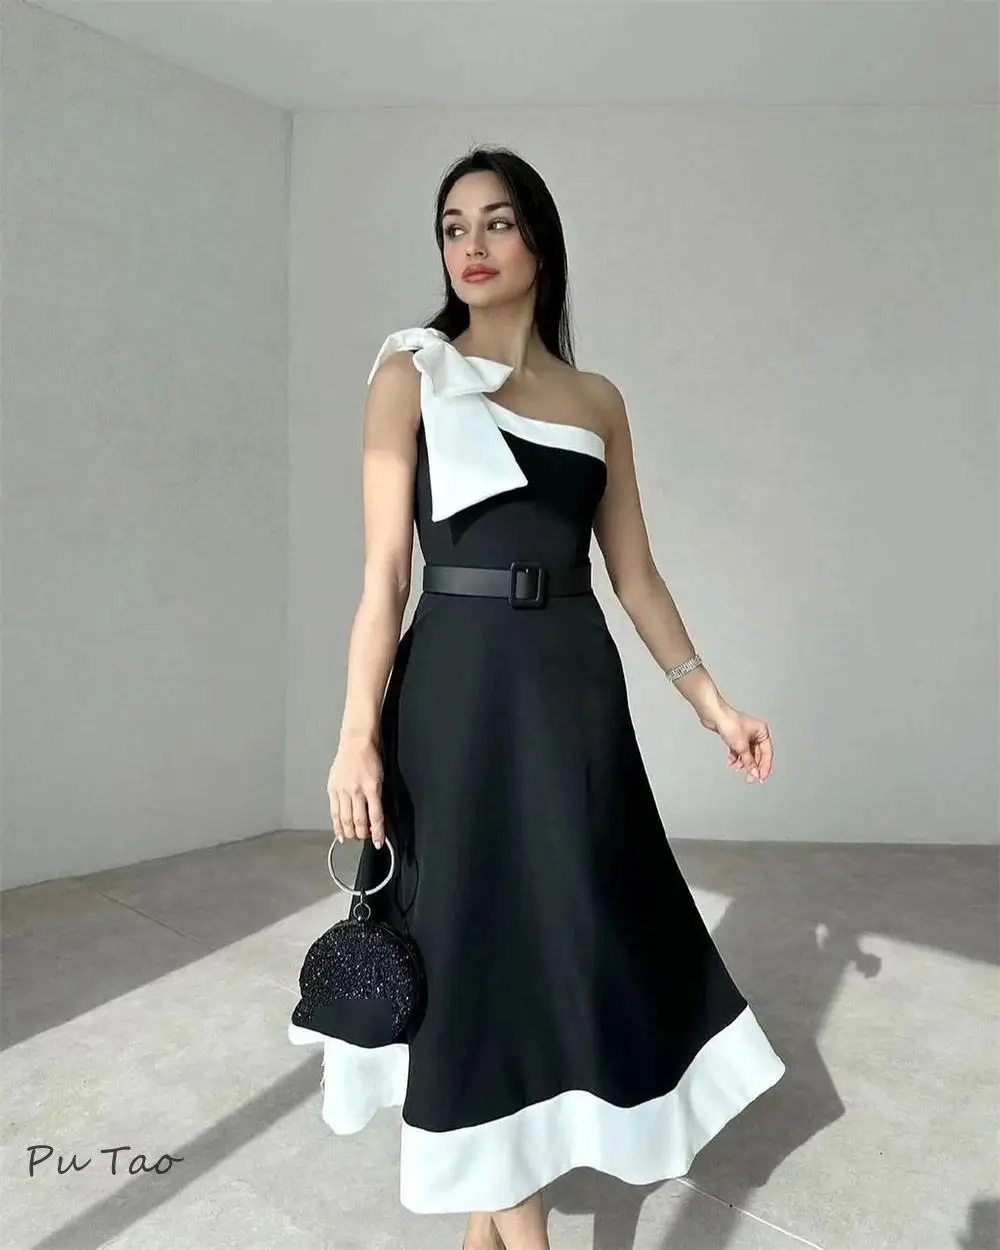 PuTao Satin Bow Prom Dress Sashes Cocktail Party Dress A-line One-shoulder Bespoke Formal Occasion Dress Women Ankle Length